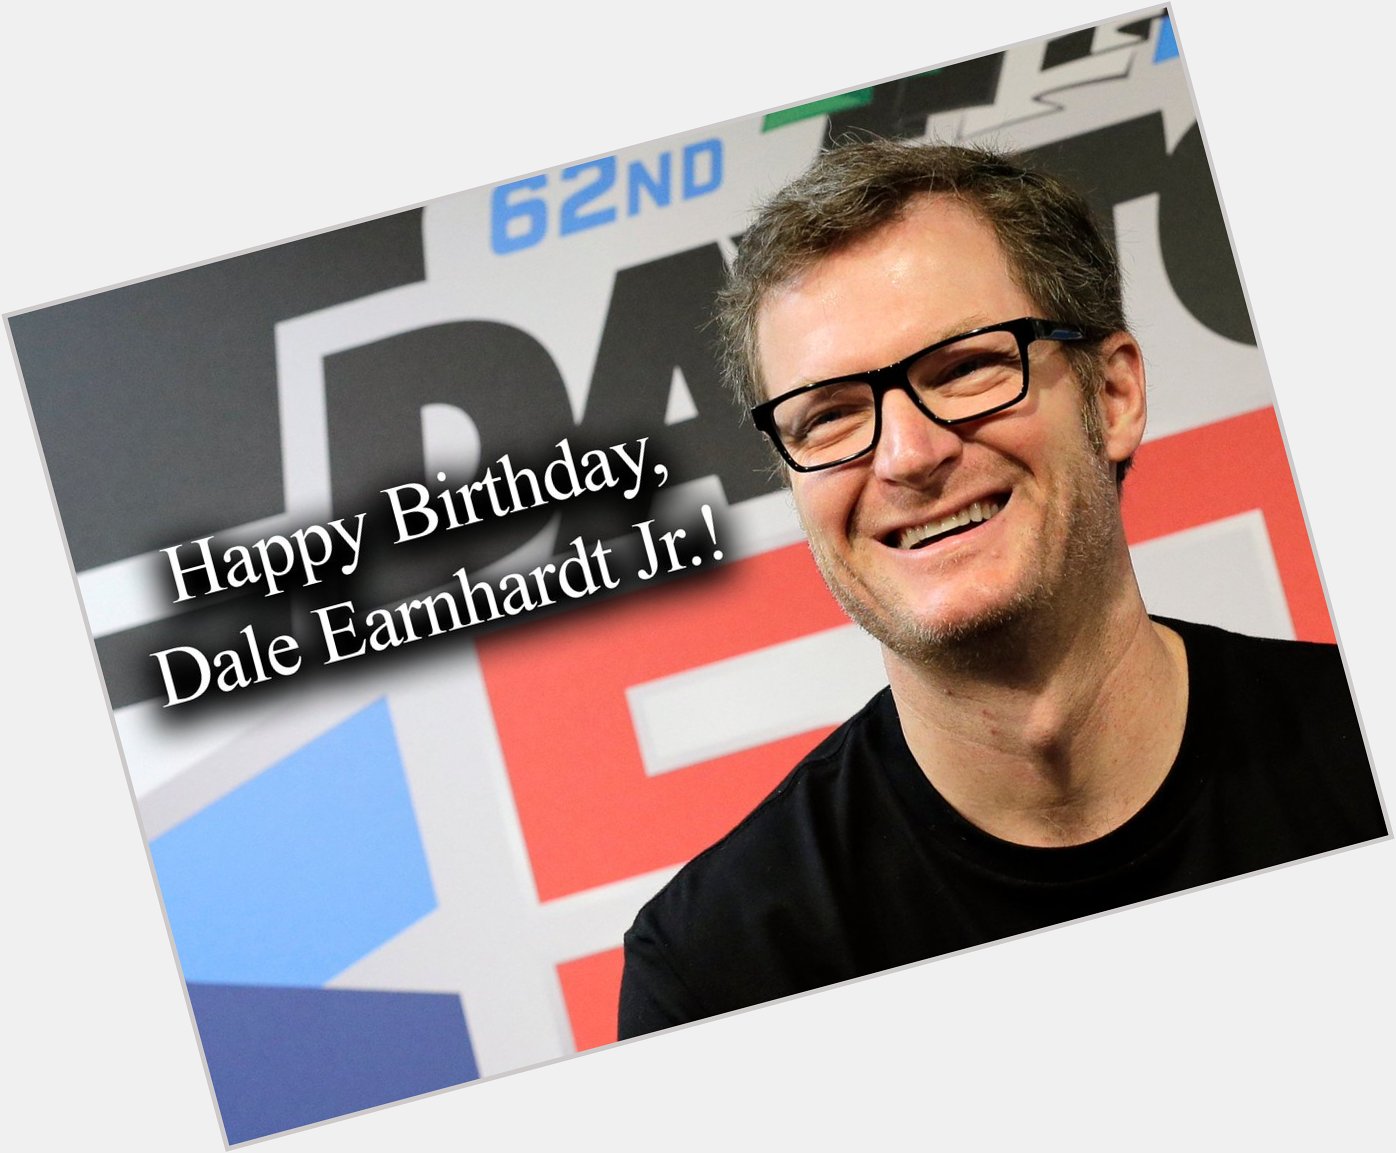 Happy birthday to Dale Earnhardt Jr.! The auto racing icon turns 47 today.  